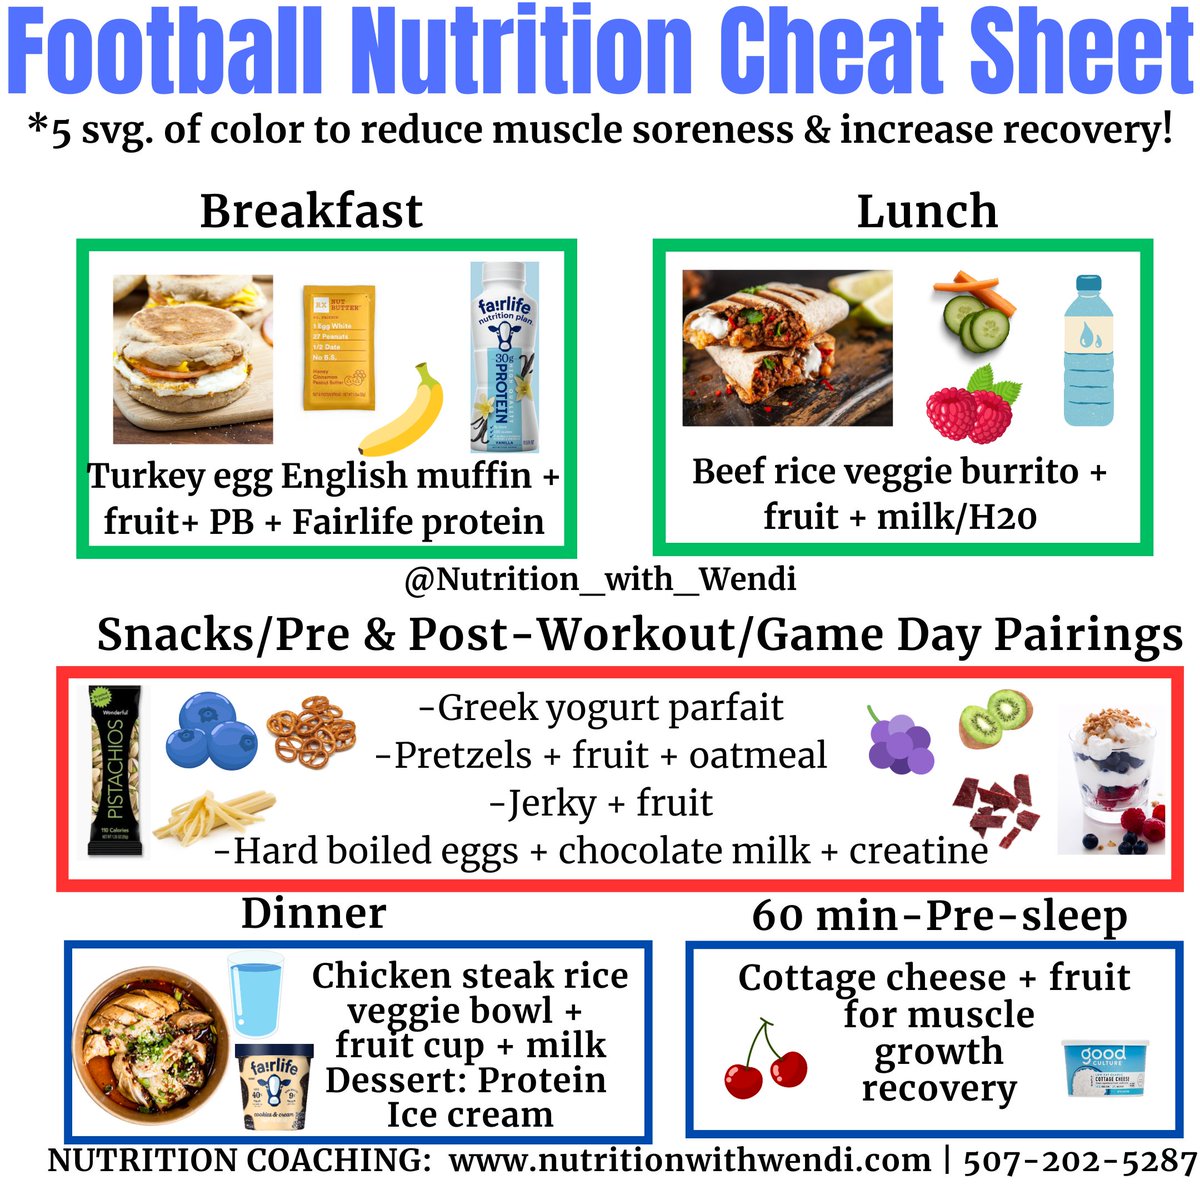 Are you focused on getting bigger, faster and stronger this off-season? Championships are won in the off-season. If you want to be great this fall the time is now. Fuel up with protein, carbs and quality calories. Aim for 7-9 hours of sleep and don't skimp on your hydration!